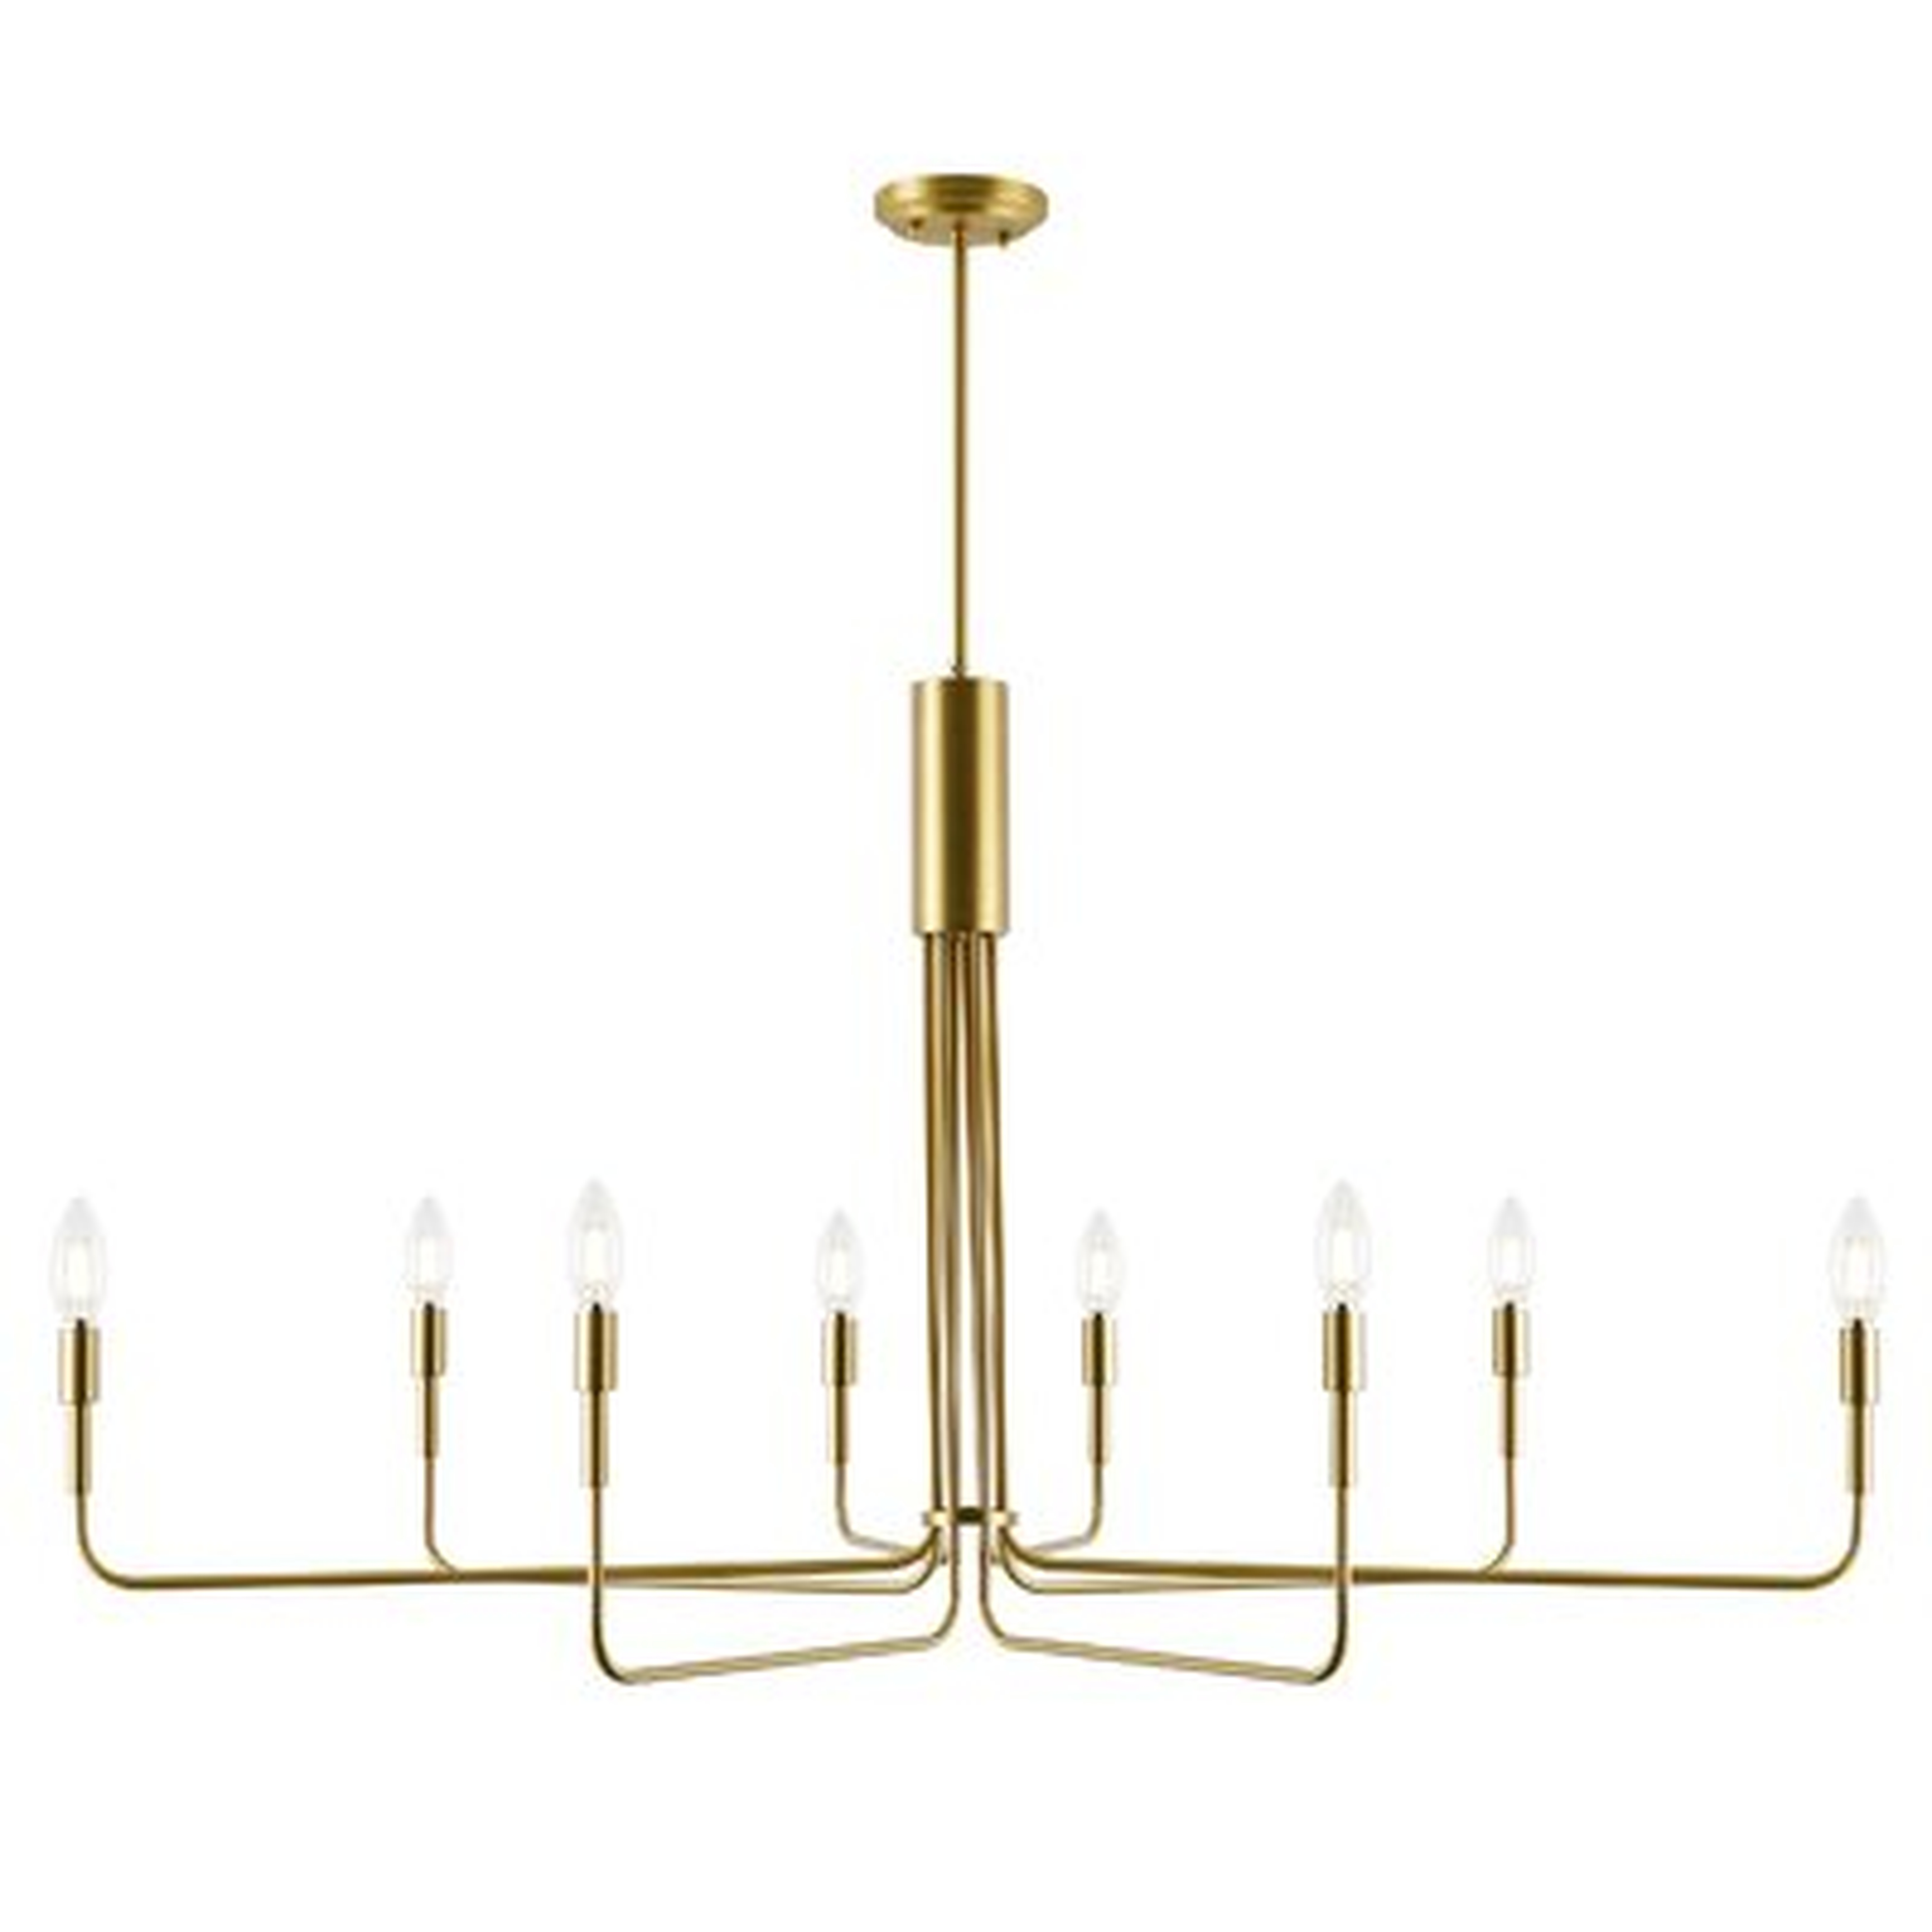 Brushed Brass Sola 8-Light Candle Style Modern Linear Chandelier, Brushed Brass - Wayfair